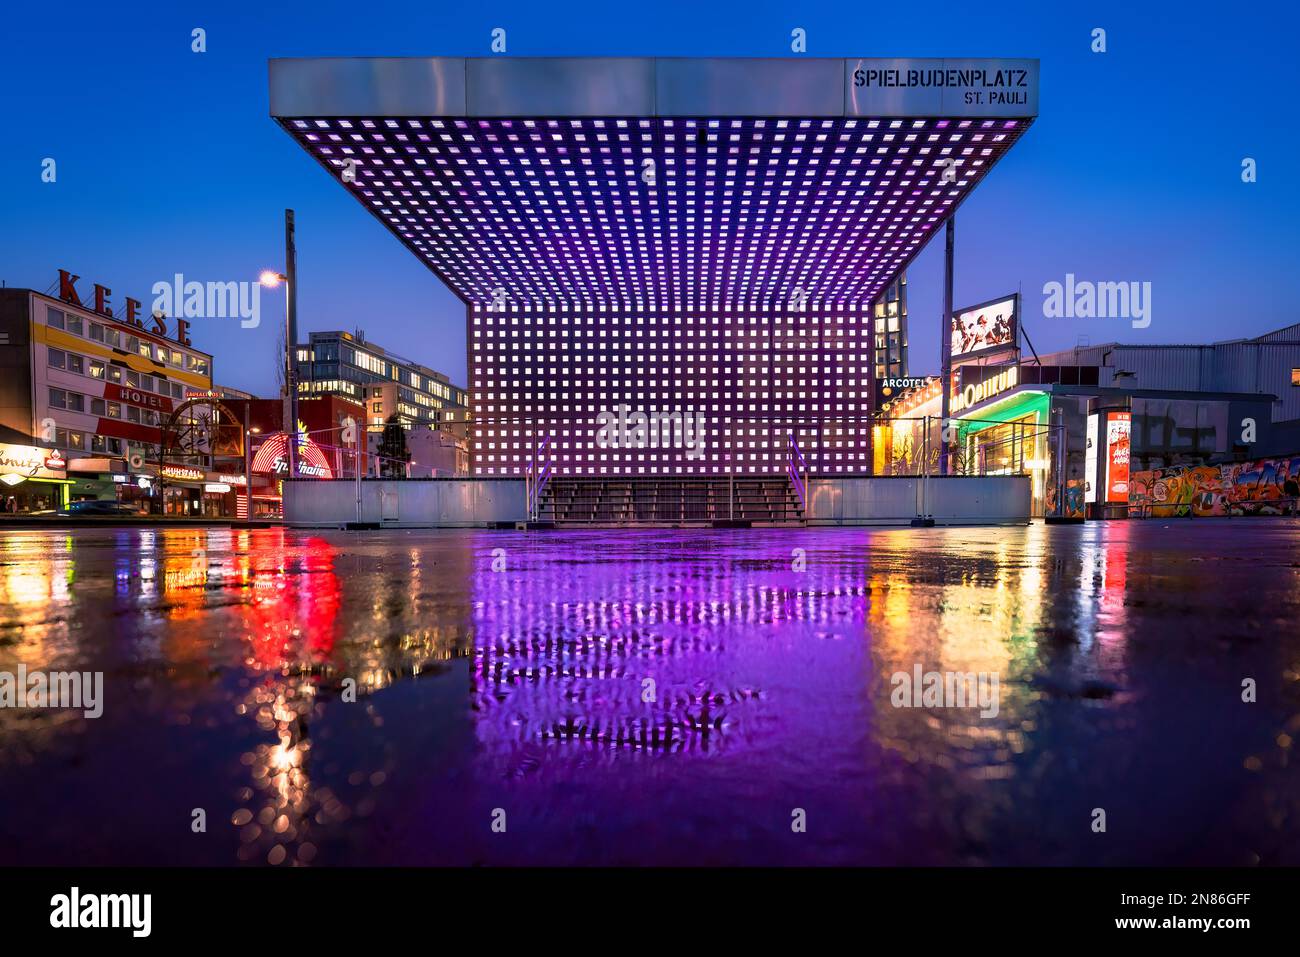 Open-air stage at Spielbudenplatz Square in Reeperbahn at Night - St. Pauli District - Hamburg, Germany Stock Photo